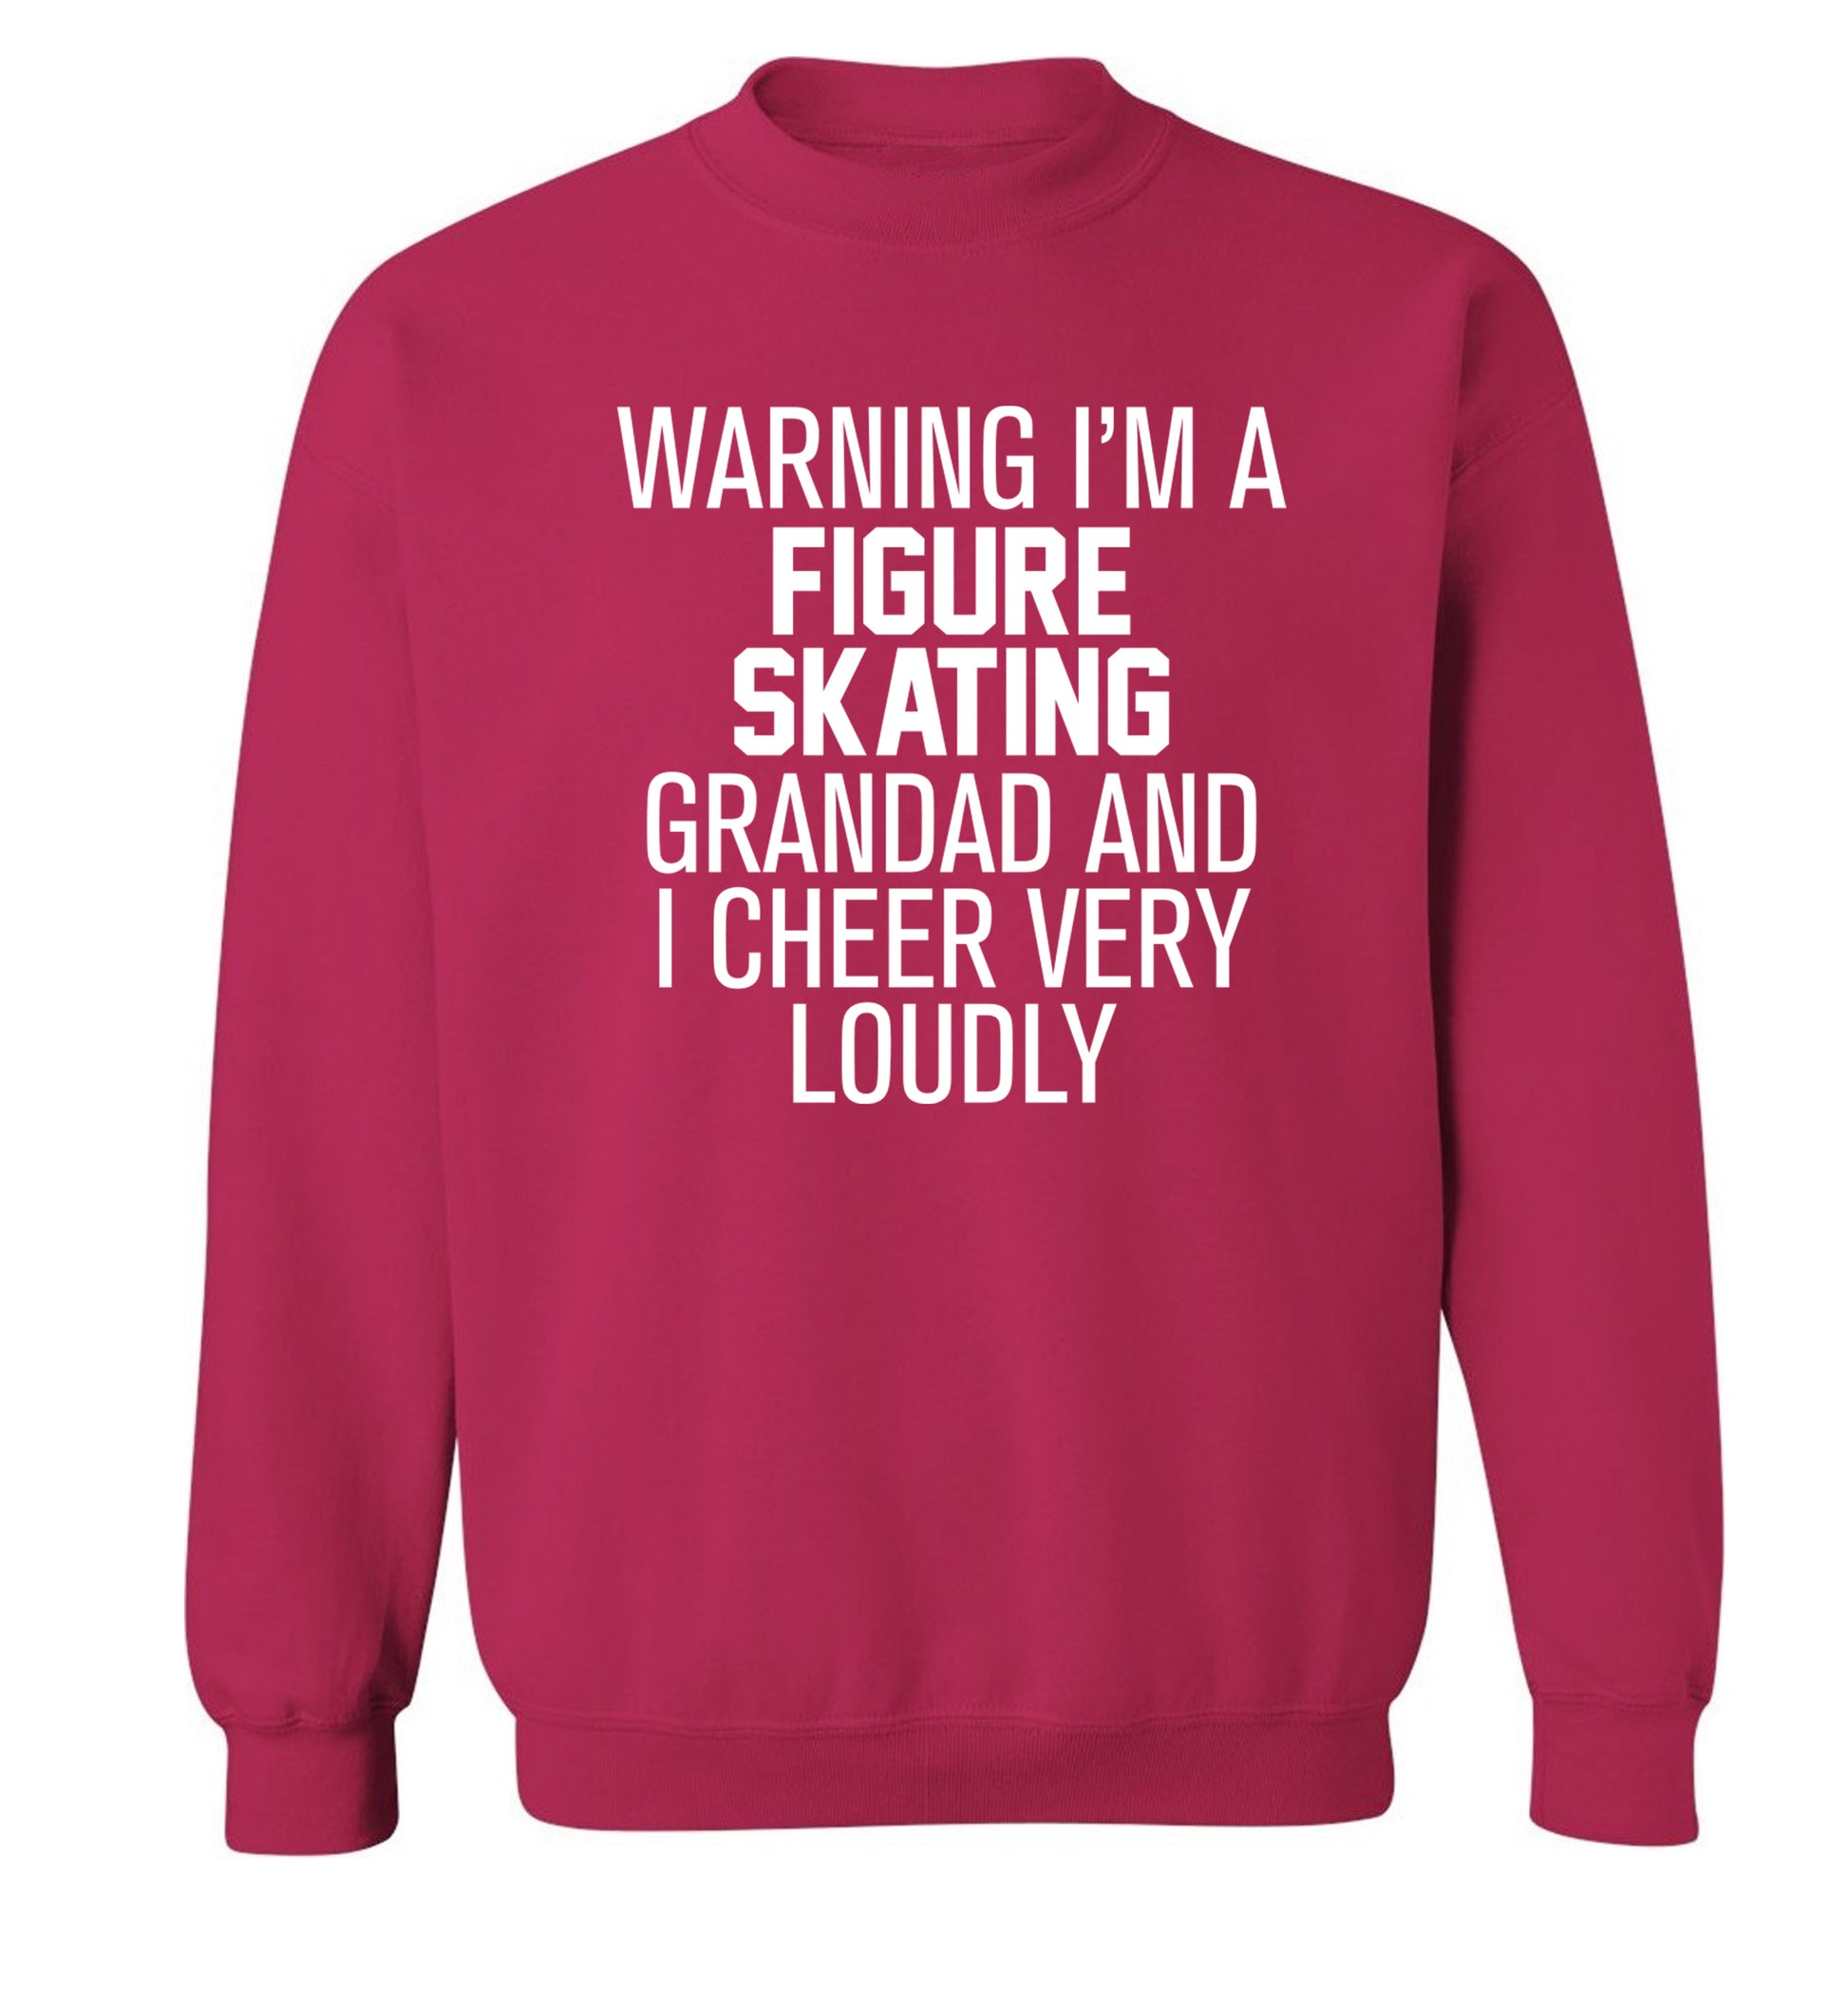 Warning I'm a figure skating grandad and I cheer very loudly Adult's unisexpink Sweater 2XL